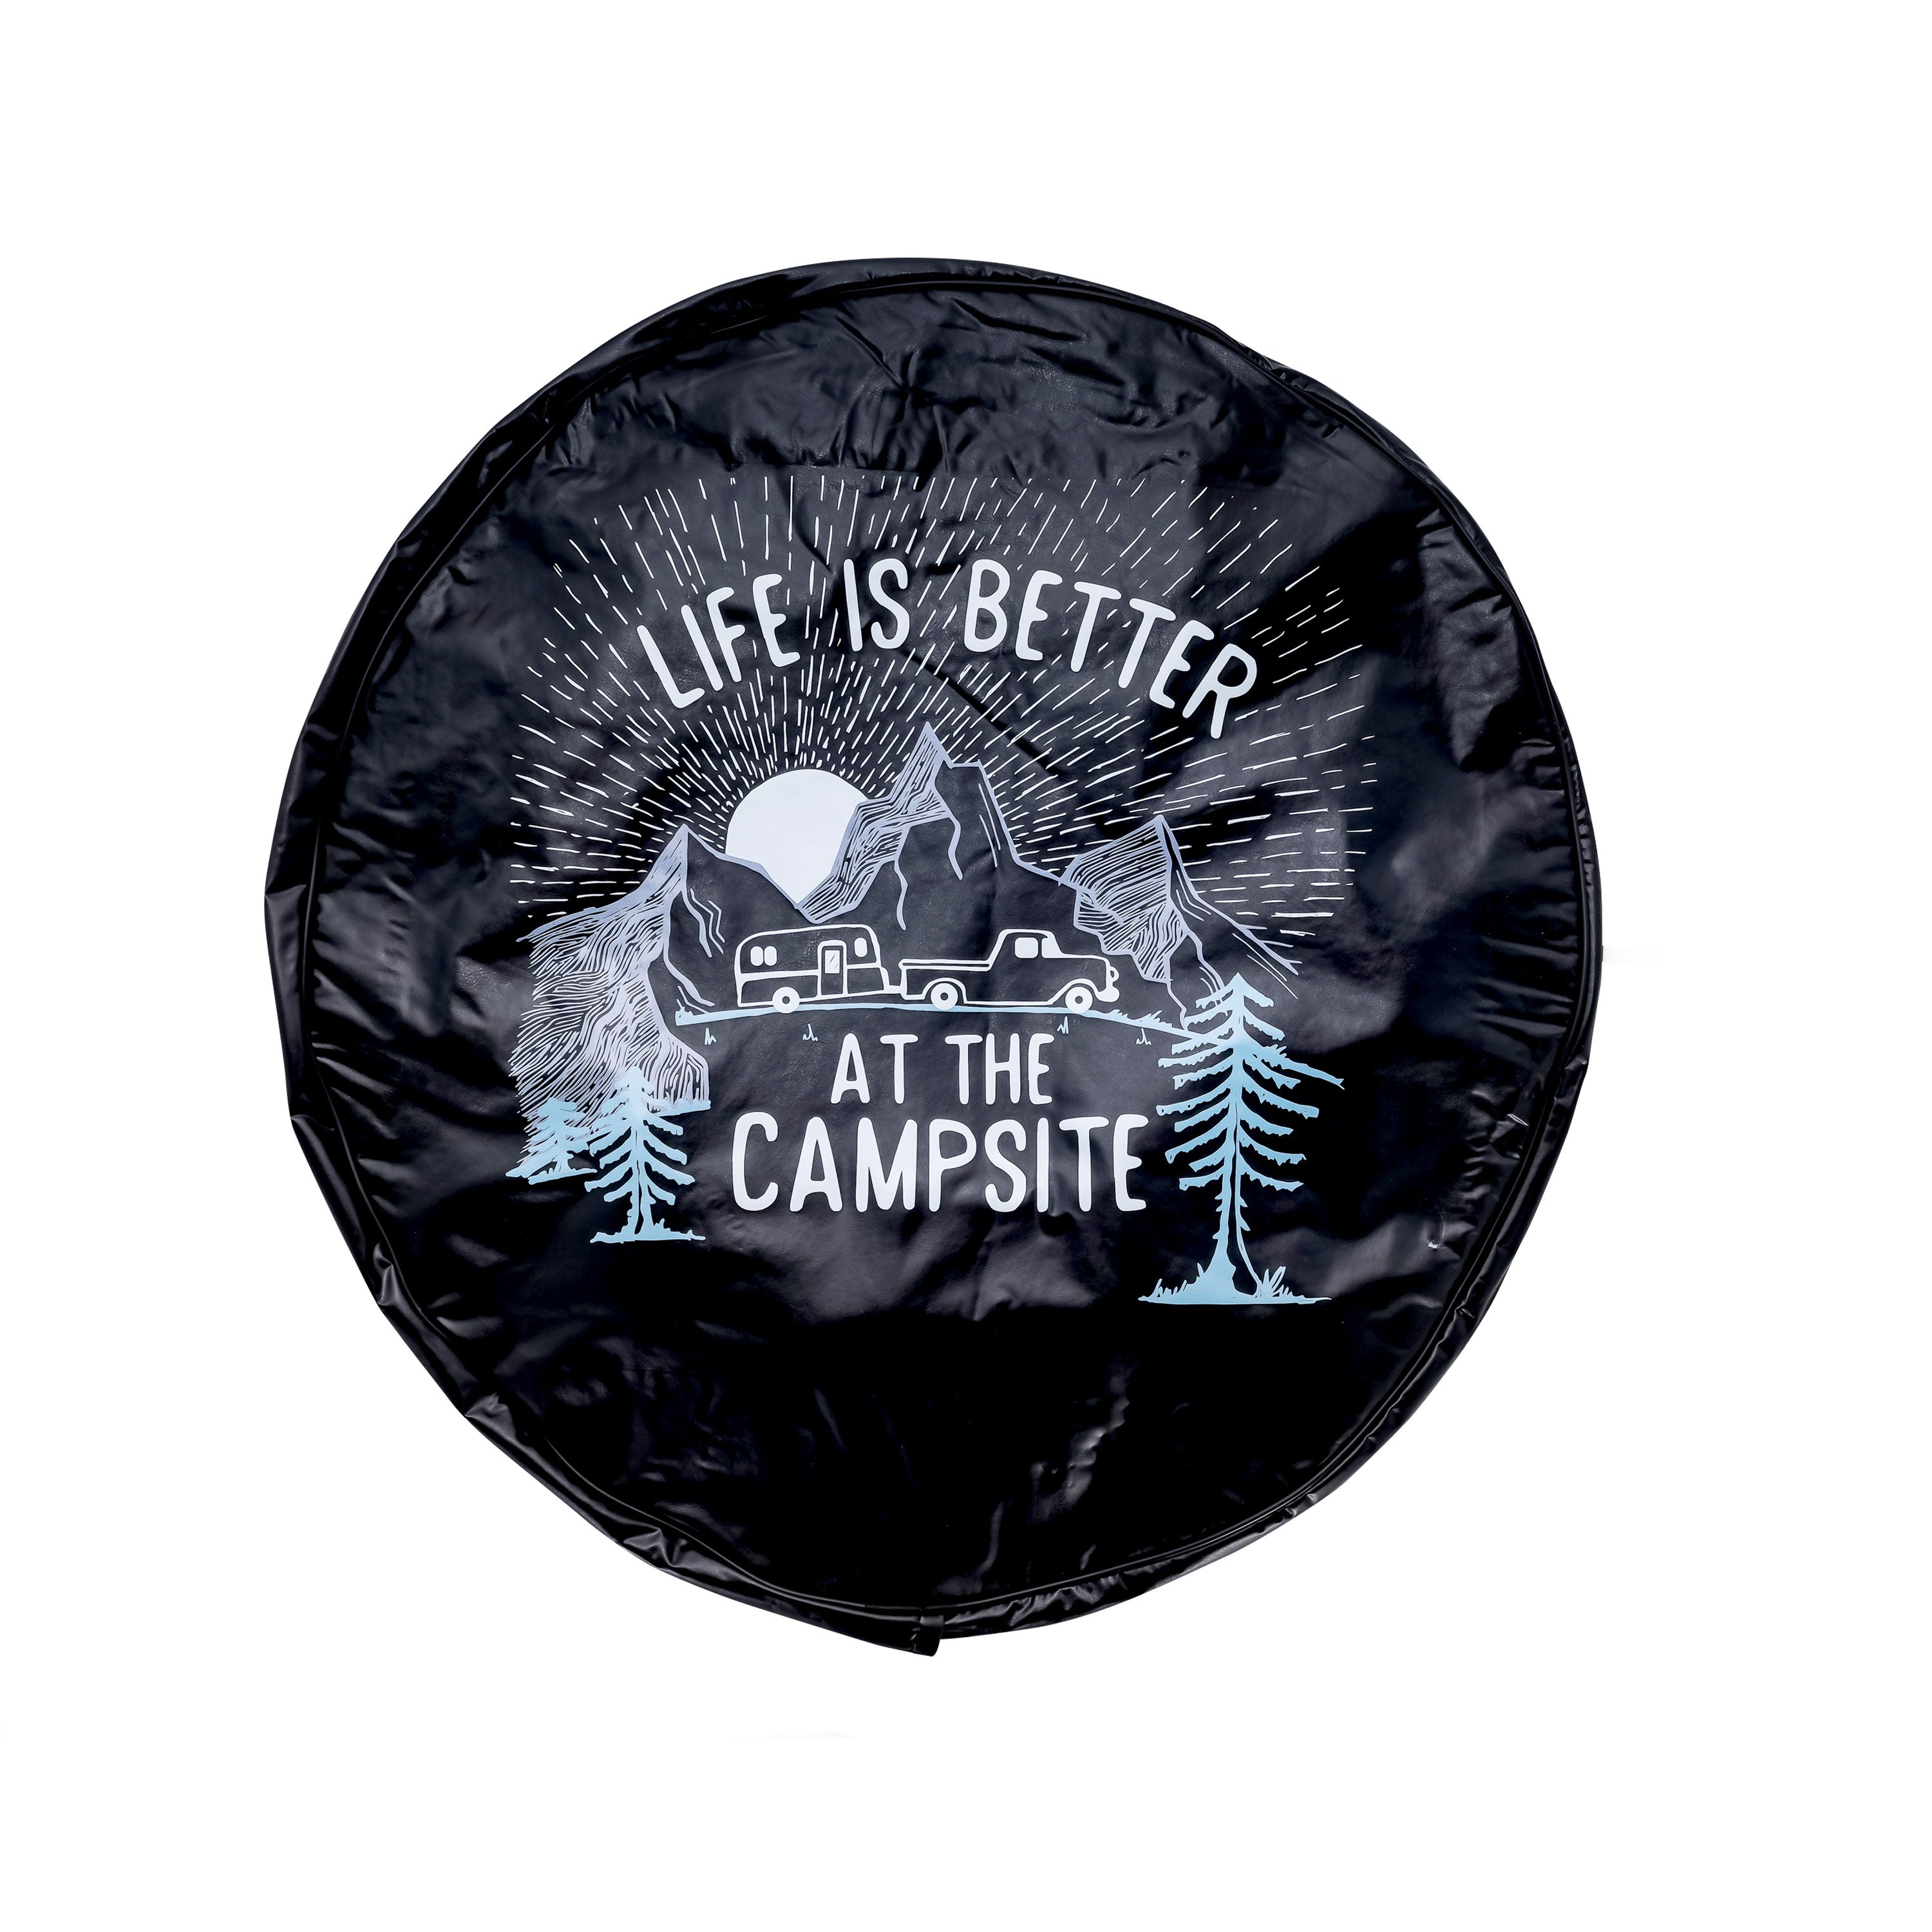 Camco 53290 "Life is Better at the Campsite" Spare Tire Cover - Size J (Up to 27" Tire), Sunrise